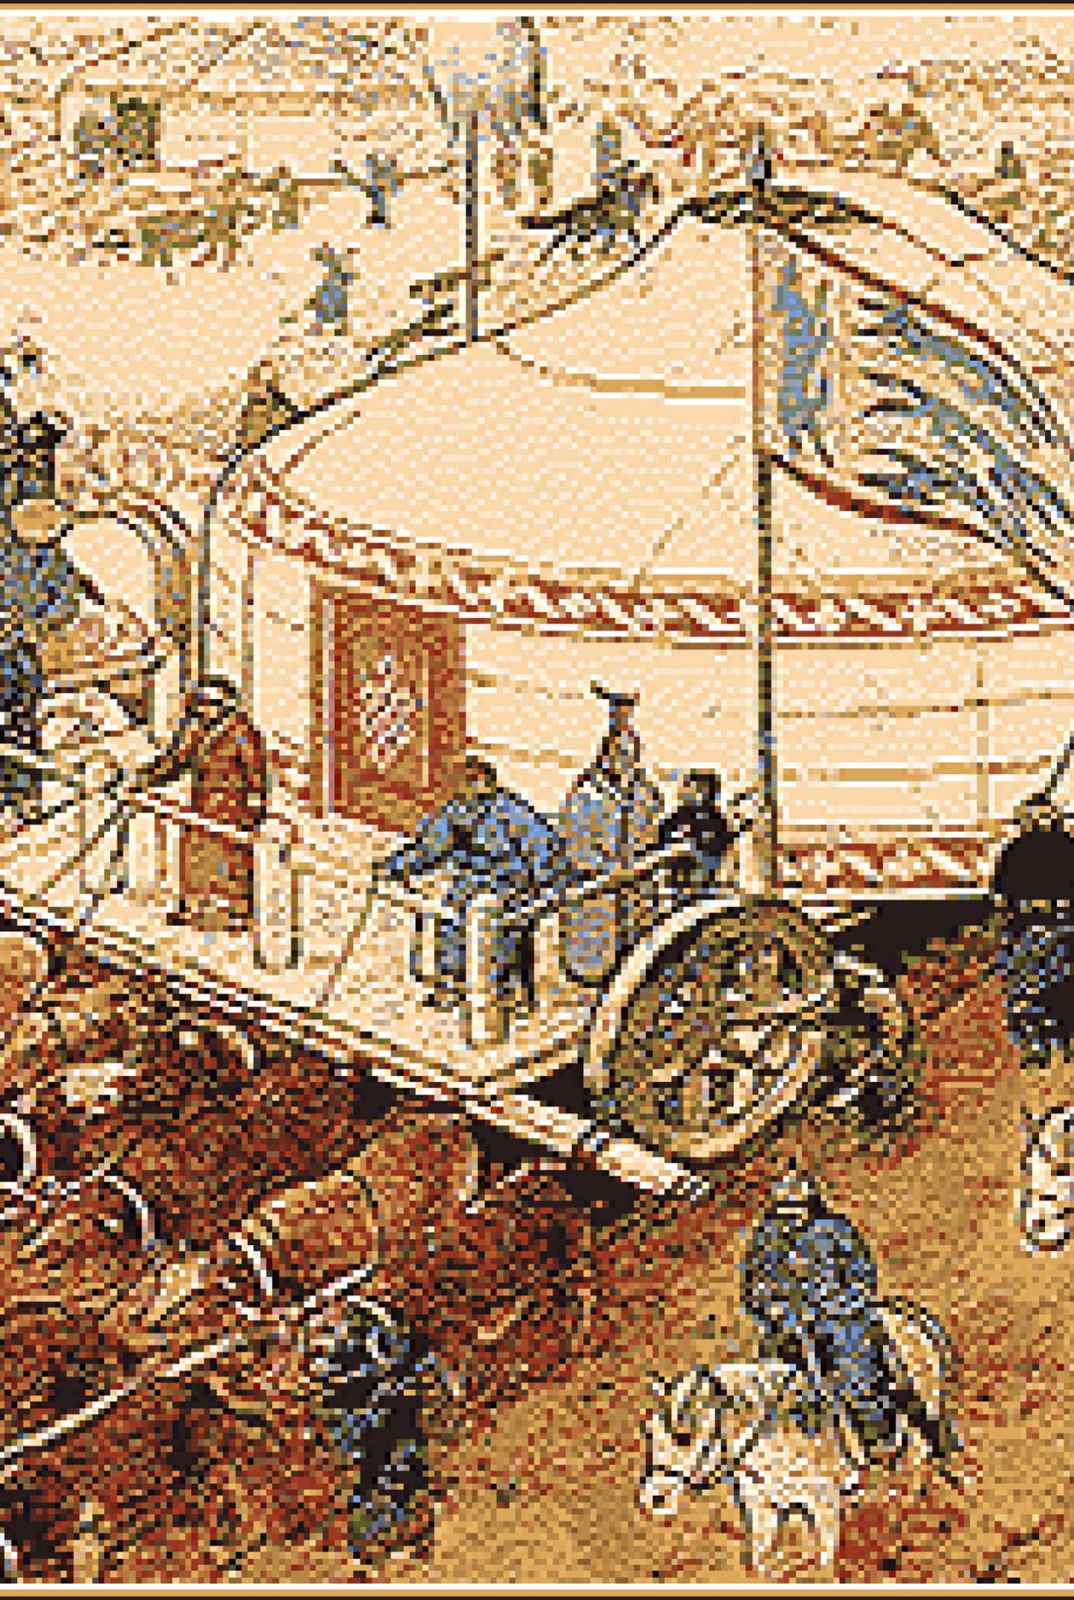 Traditional East Asian scene of a large yurt on a wheeled platform being transported, surrounded by figures in historical attire and horses, representing nomadic cultural heritage